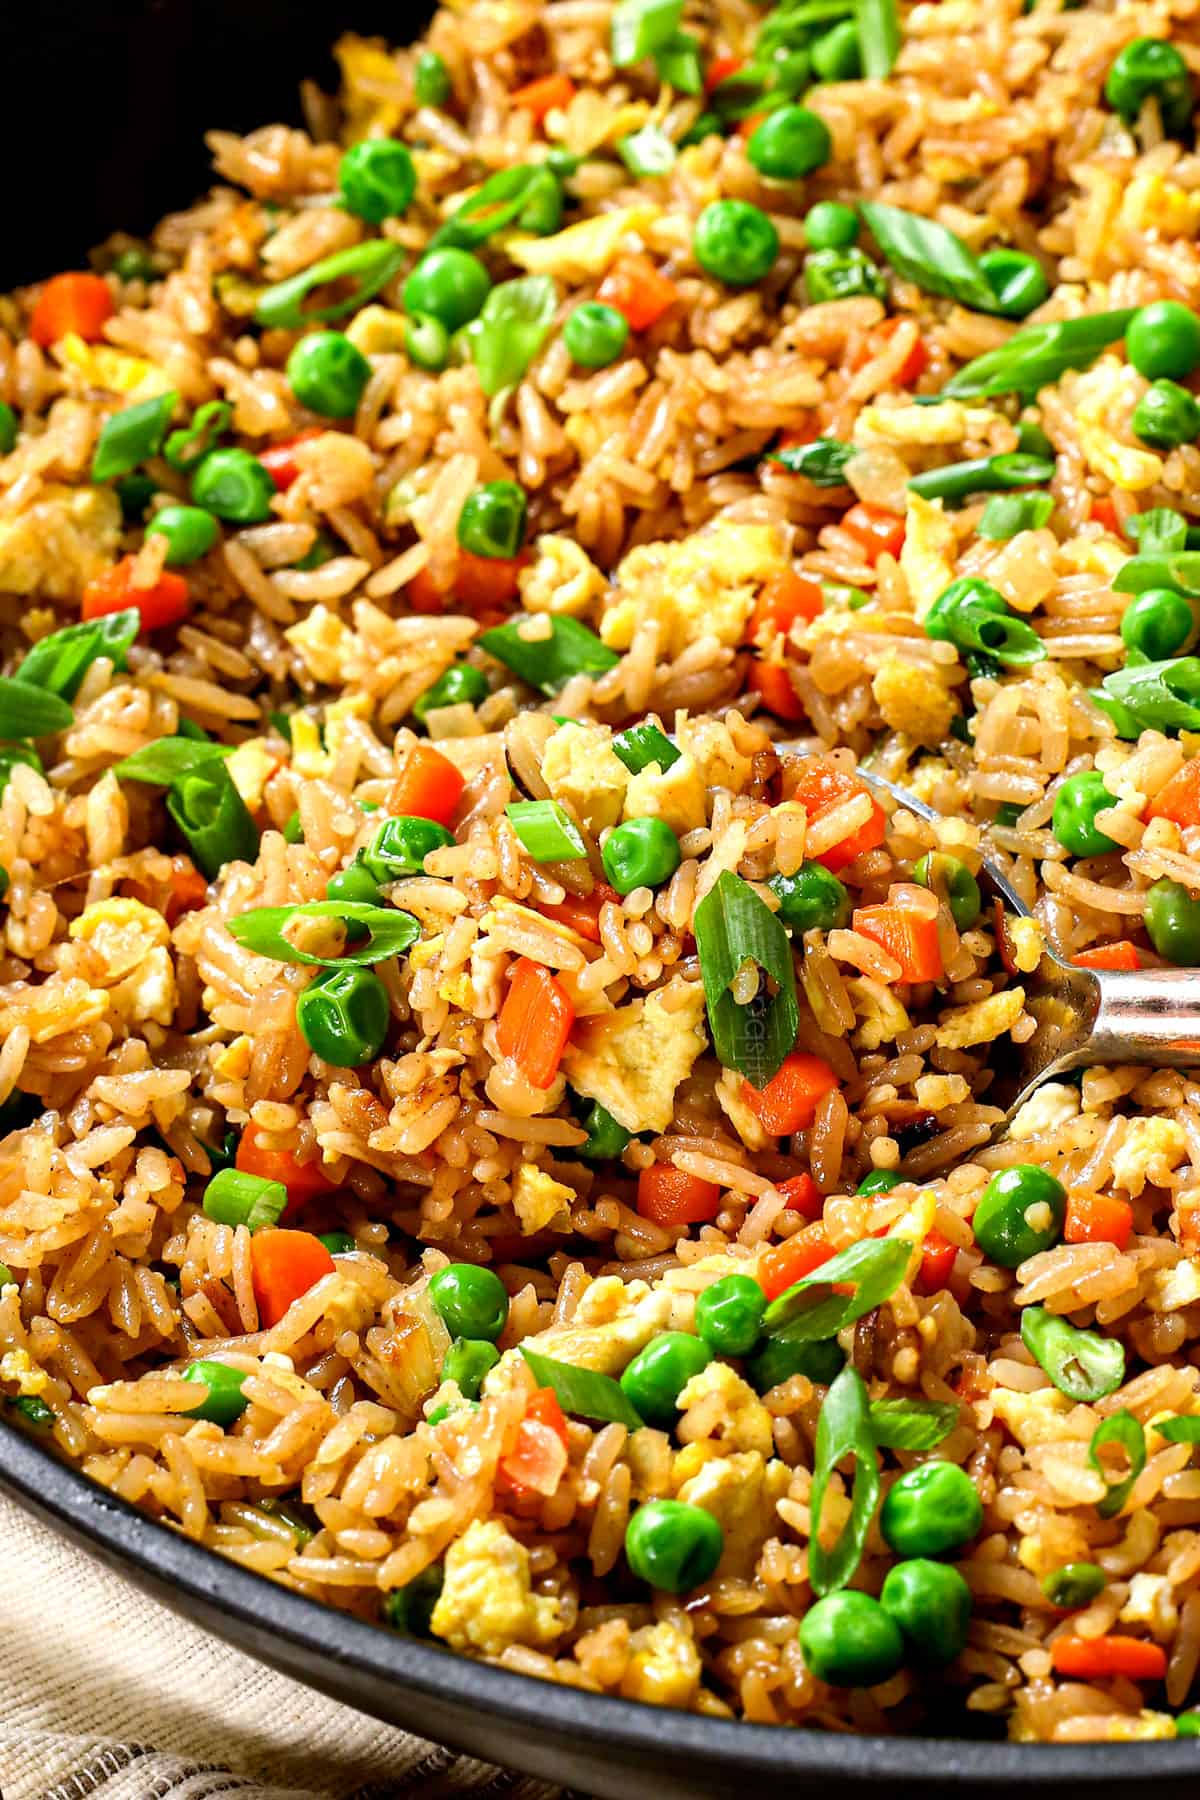 stirring simple fried rice recipe showing all the vegetables